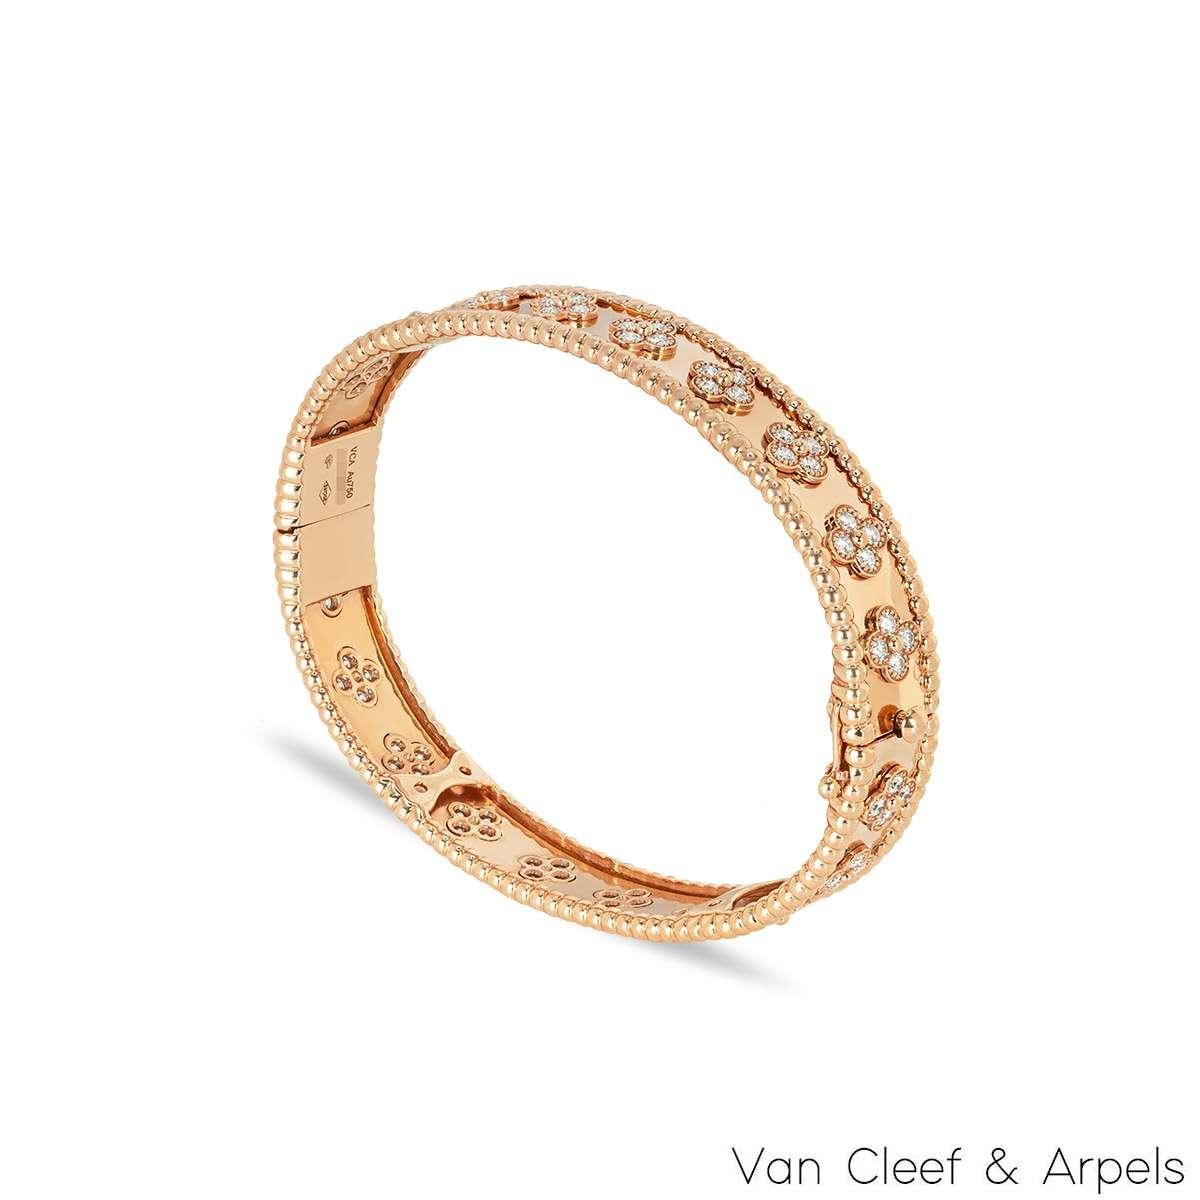 A beautiful 18k rose gold bracelet by Van Cleef & Arpels, from their Perlée Clovers collection. The bracelet features 20 of their signature four leaf clover motifs, each set with 4 round brilliant cut diamonds with an approximate total weight of